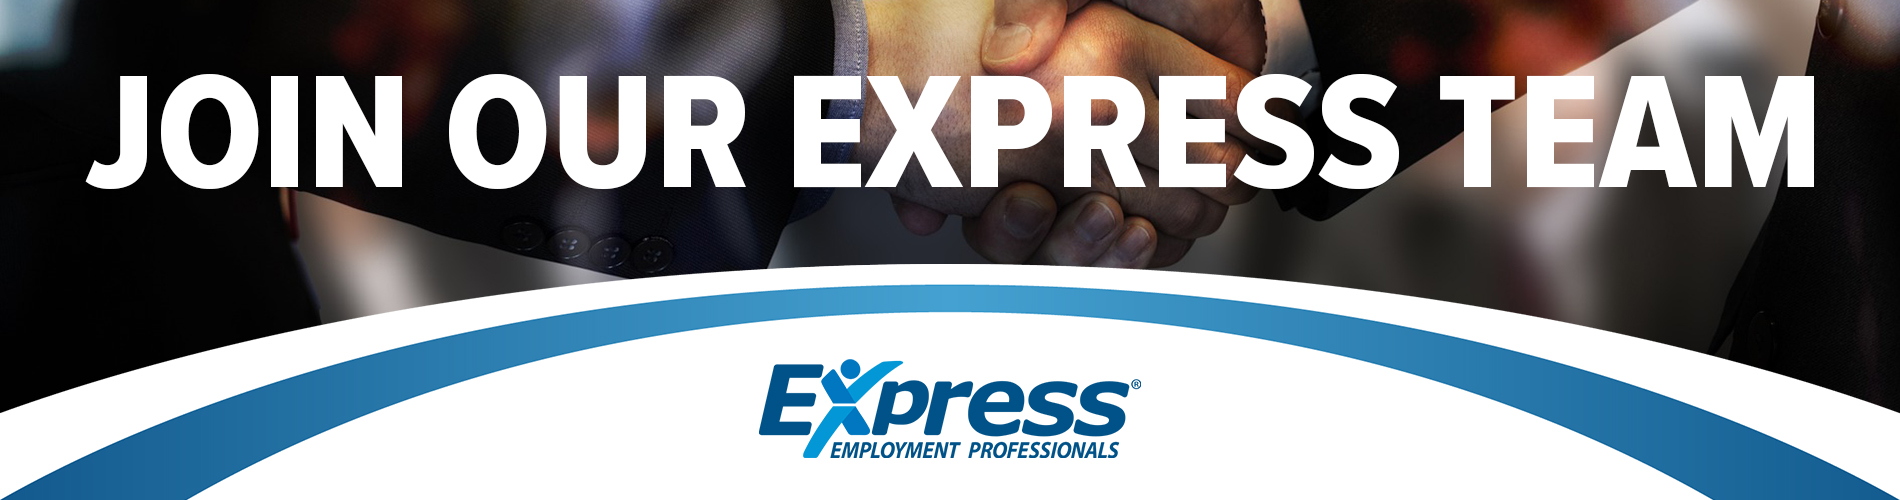 Join Our Express Team, Staffing Industry Jobs in Chandler, AZ